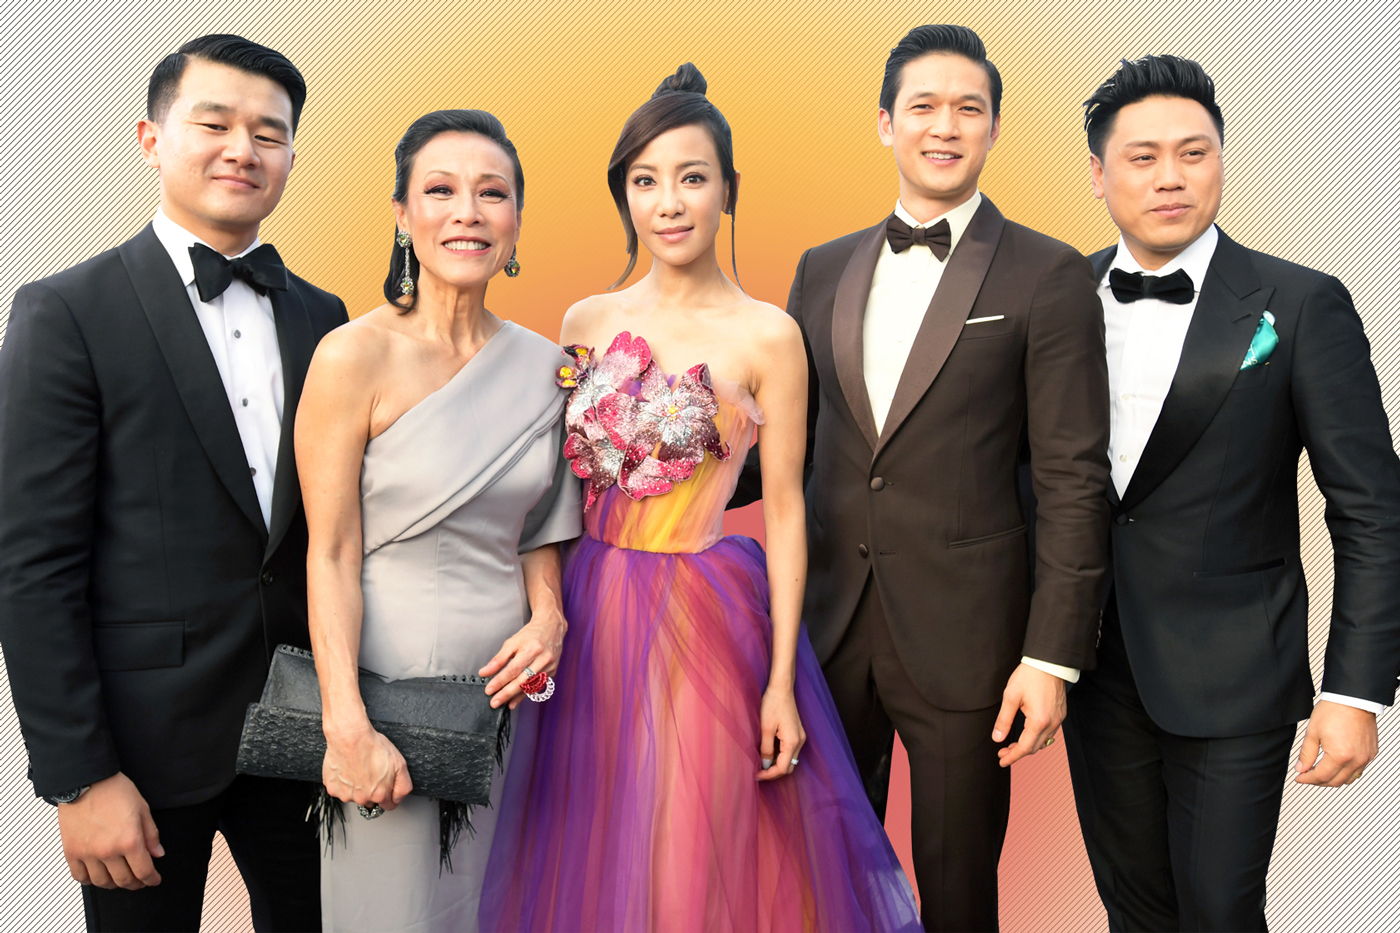 SAGs 2019: Crazy Rich Asians stars call out media who misidentified ...